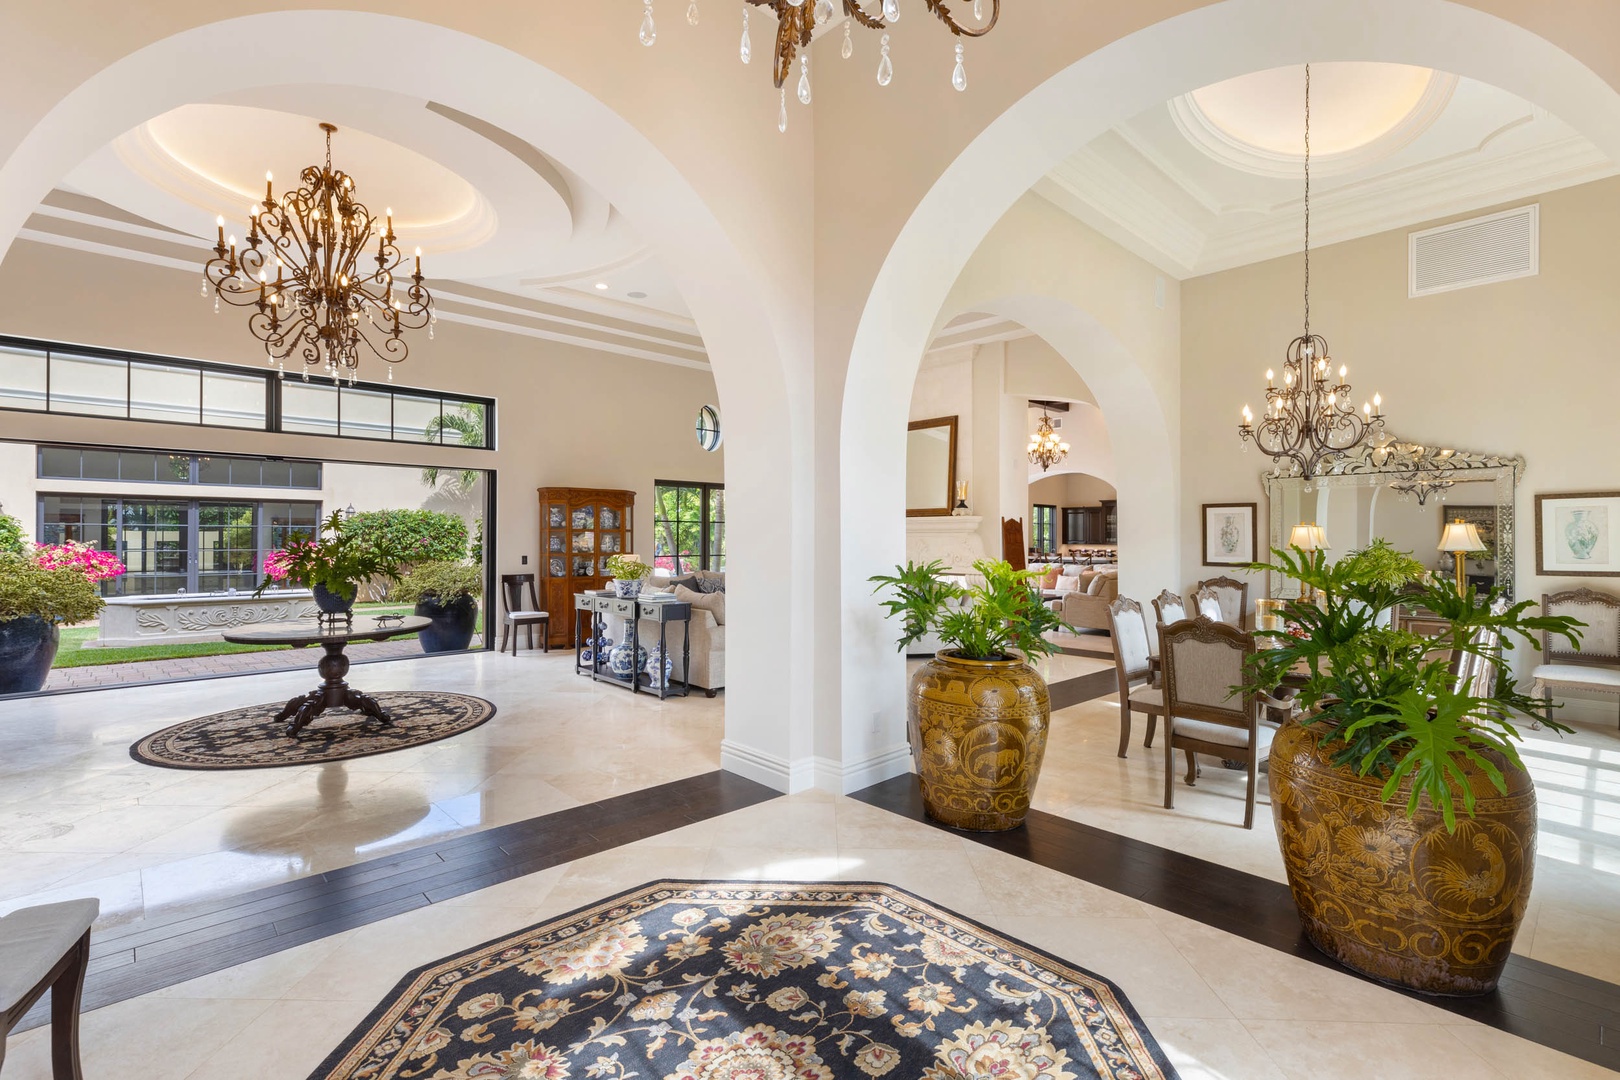 Honolulu Vacation Rentals, The Kahala Mansion - Open floorplan for seamless connection, a perfect place to gather with loved ones.